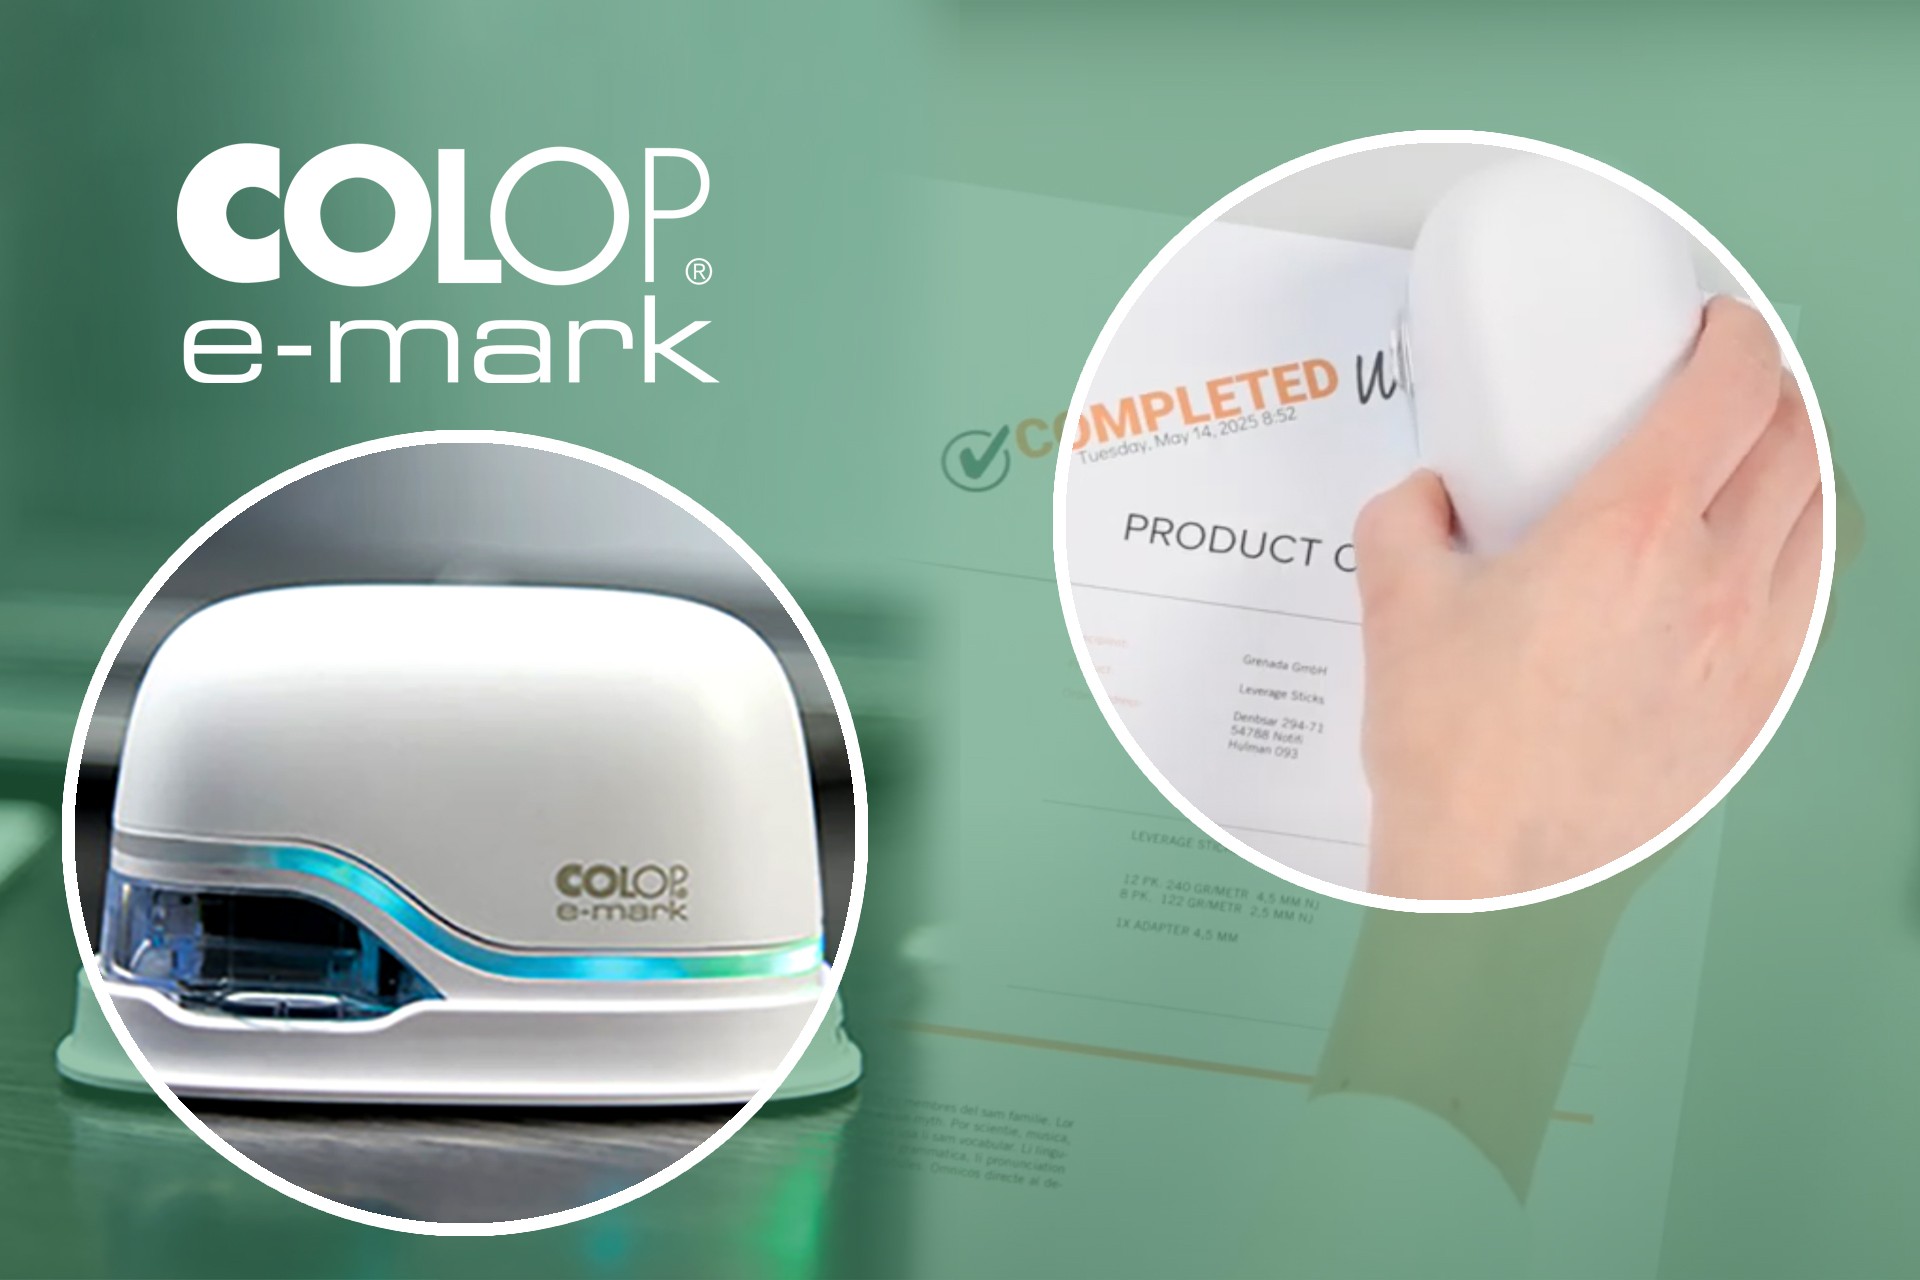 North American Office Products Award Winning COLOP e-mark